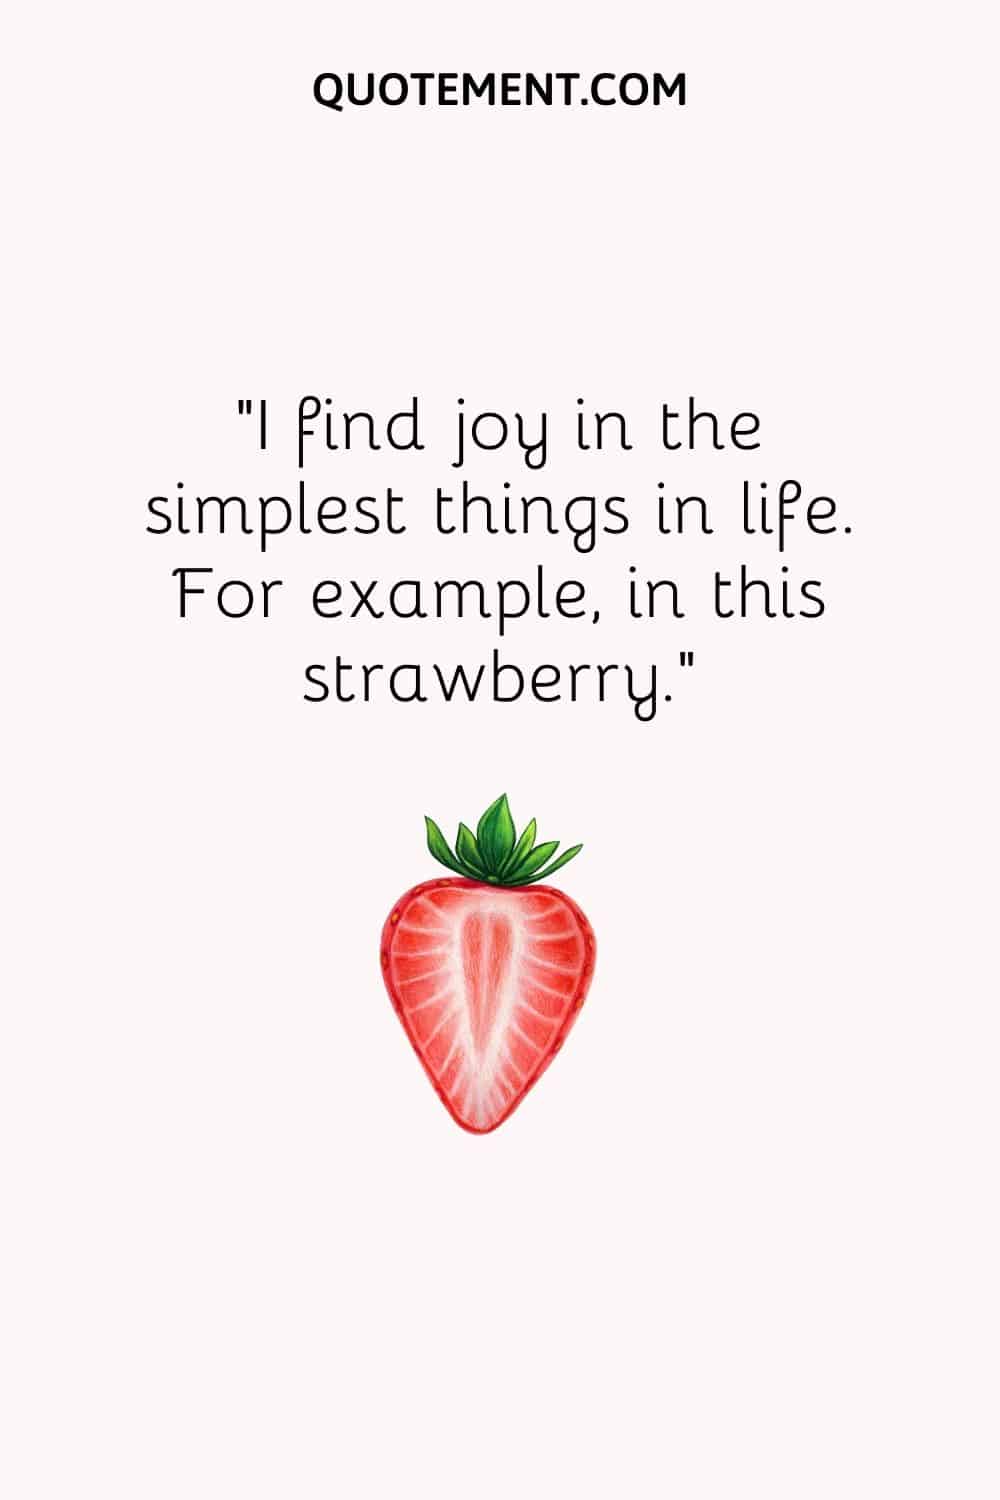 I find joy in the simplest things in life. For example, in this strawberry.